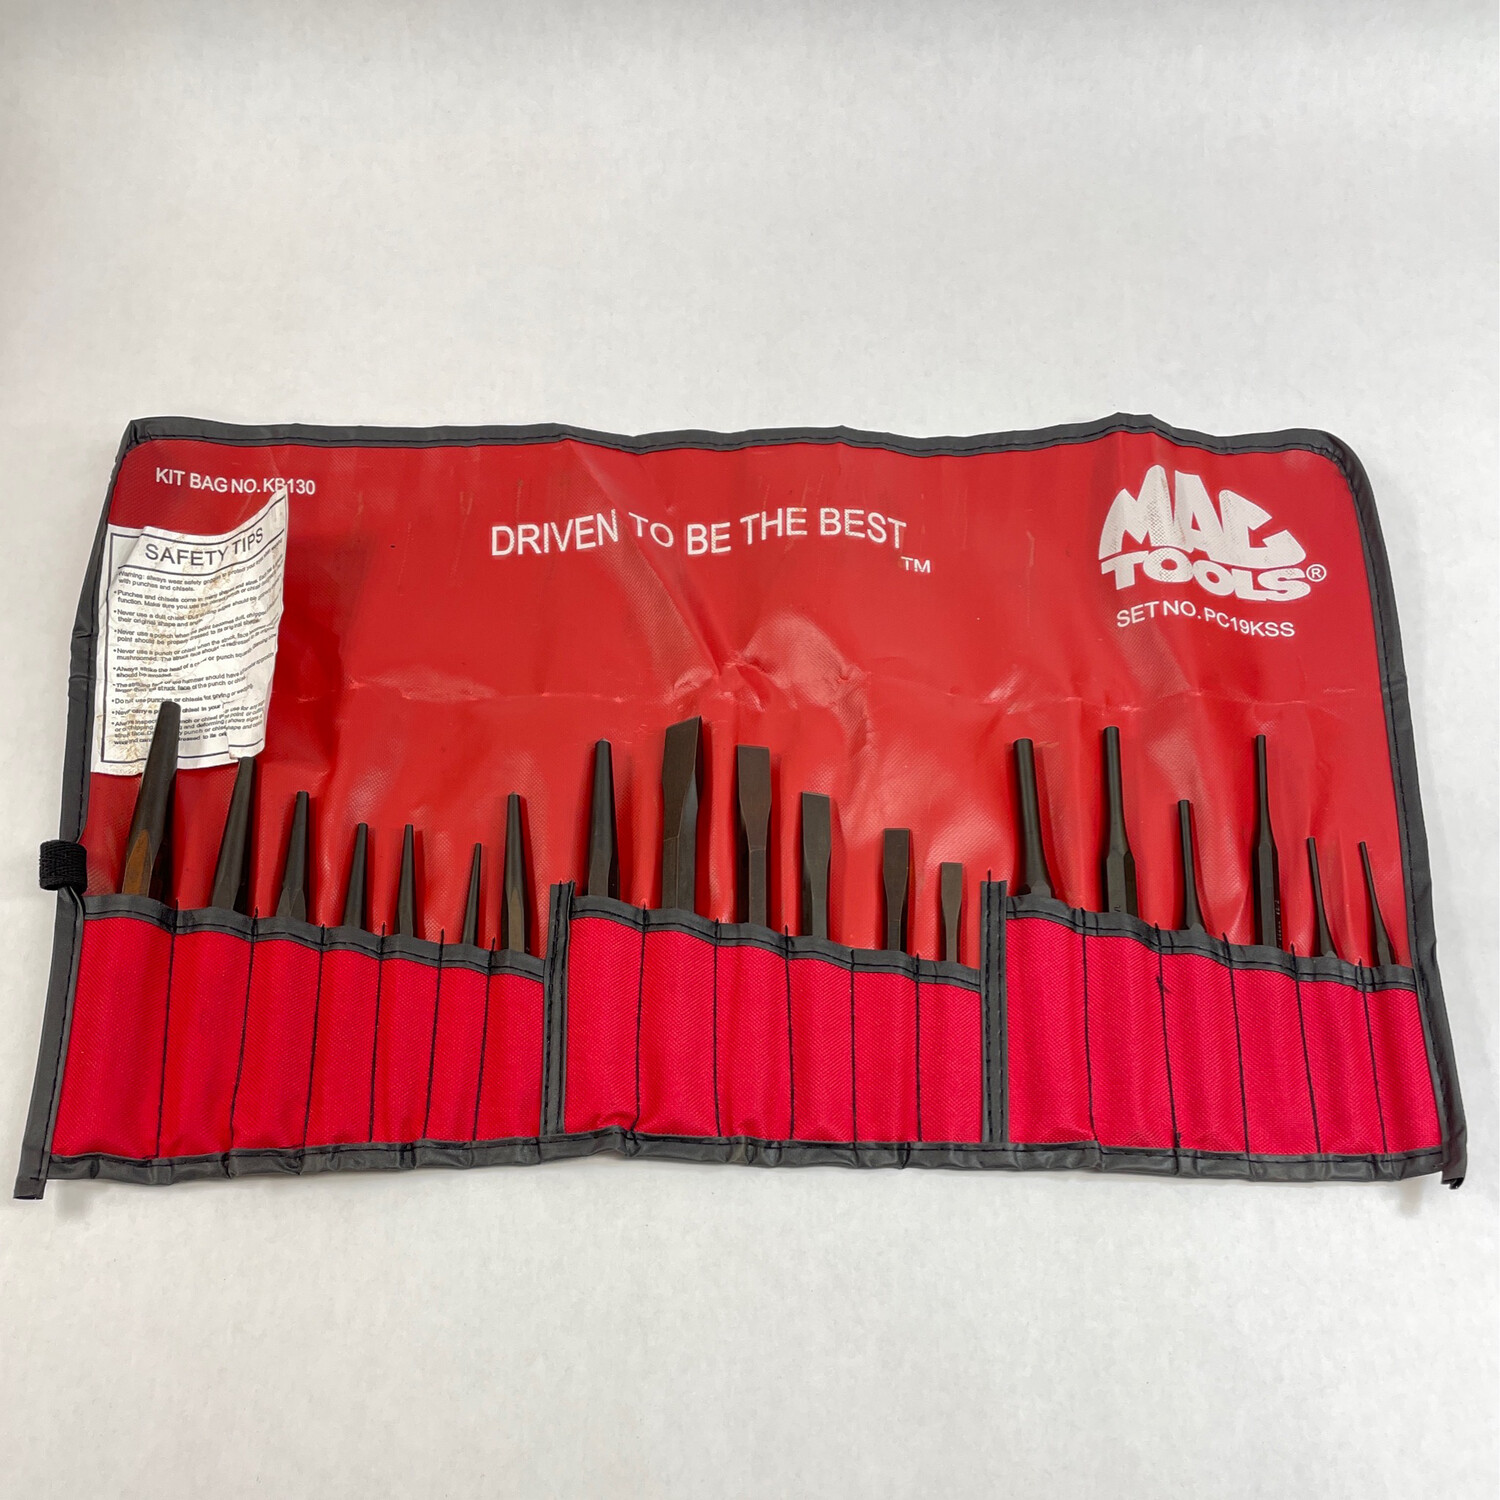 Mac Tools 19 Pc. Punch And Chisel Set, PC19KSS